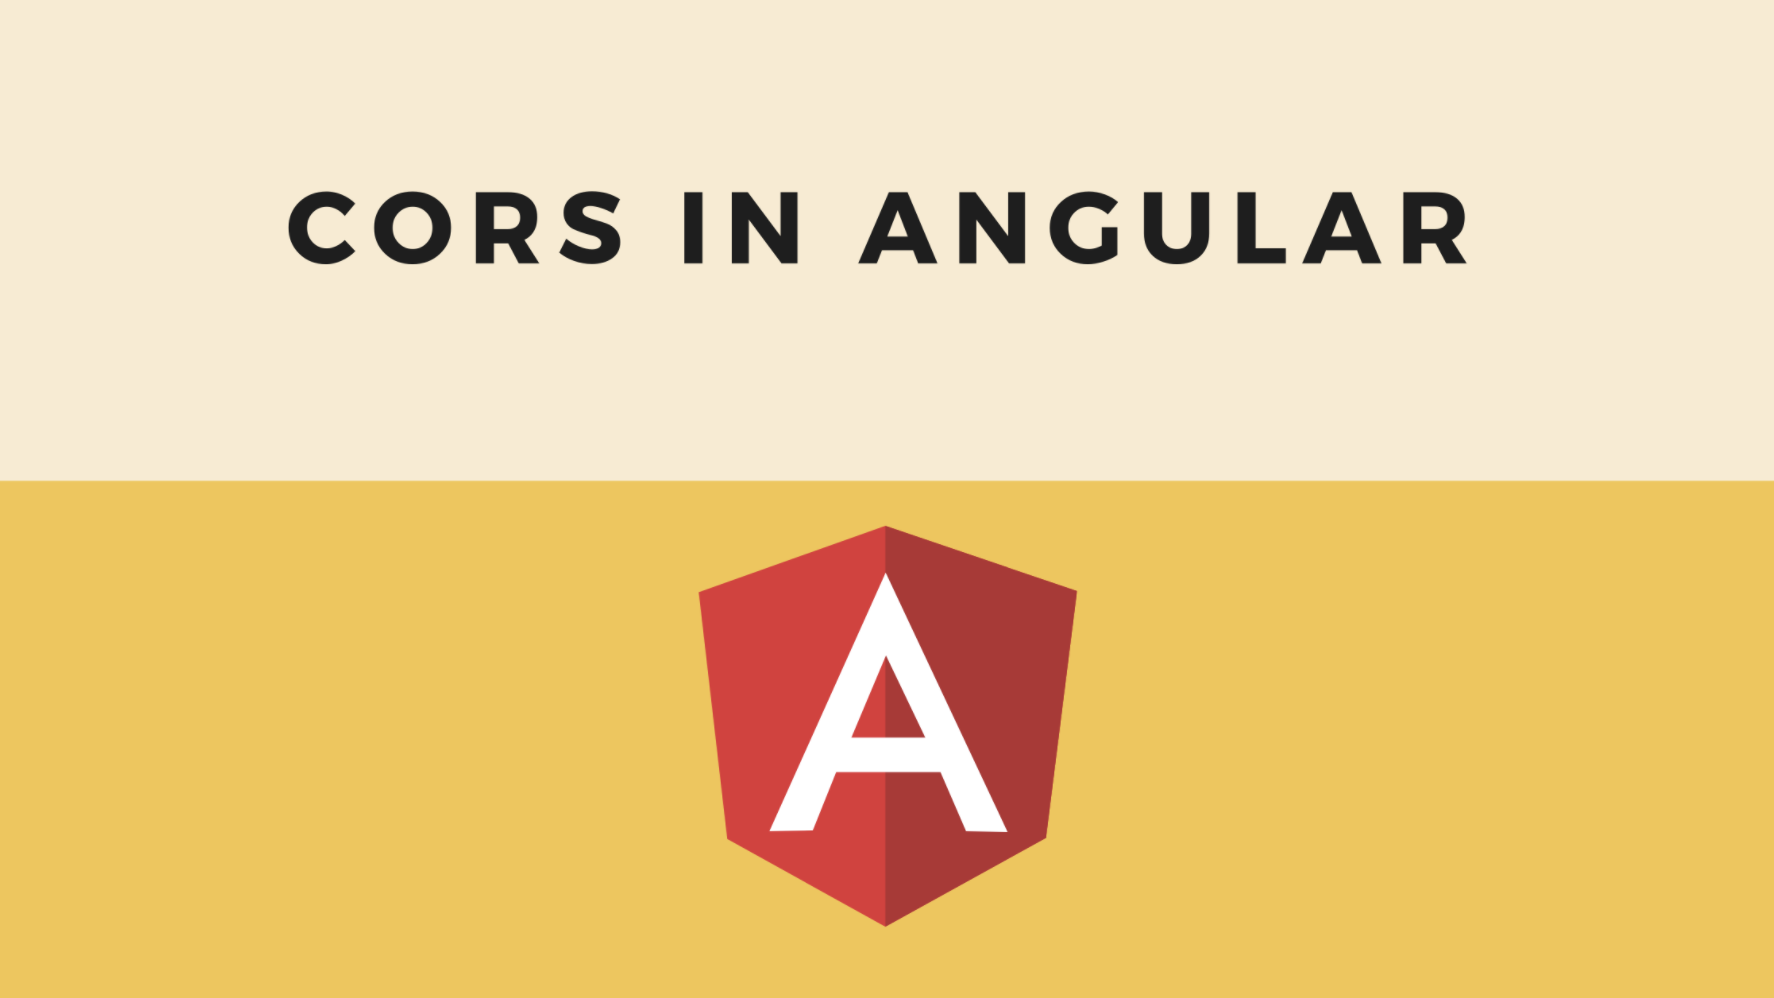 Angular CORS Guide - Picture 1 image